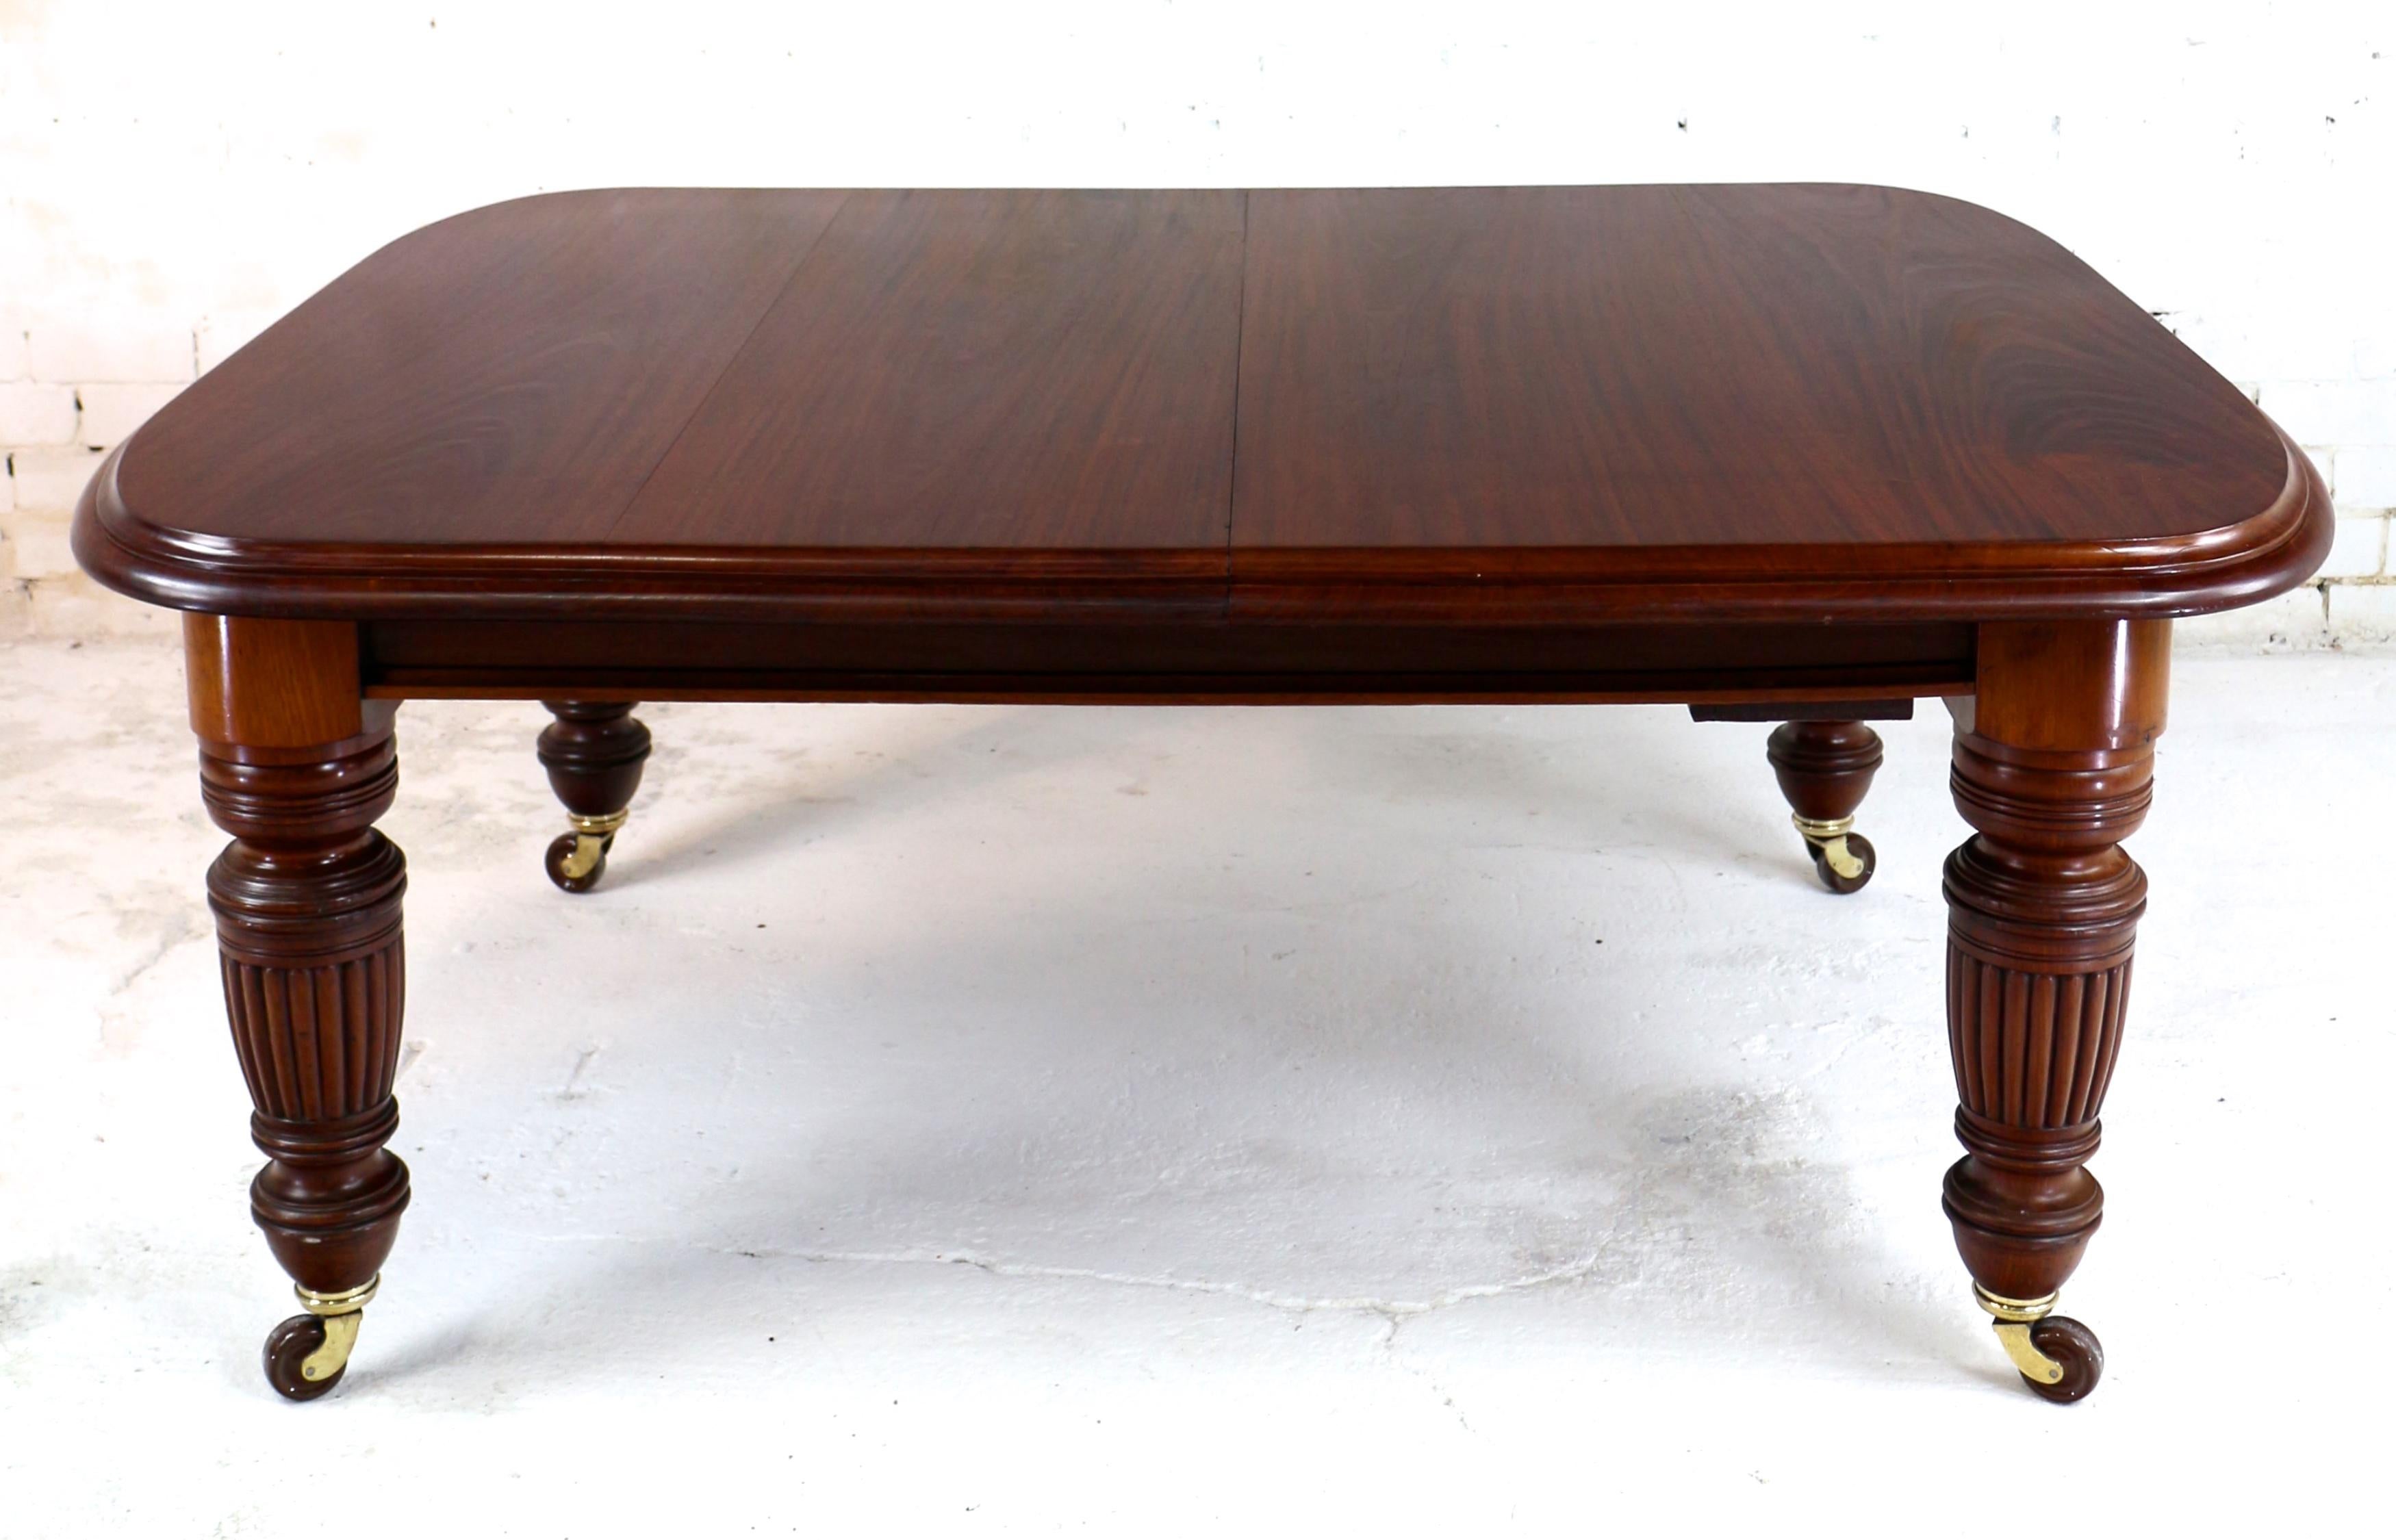 Antique English Victorian Mahogany Extending Dining Table & 3 Leaves, Seats 12 For Sale 7